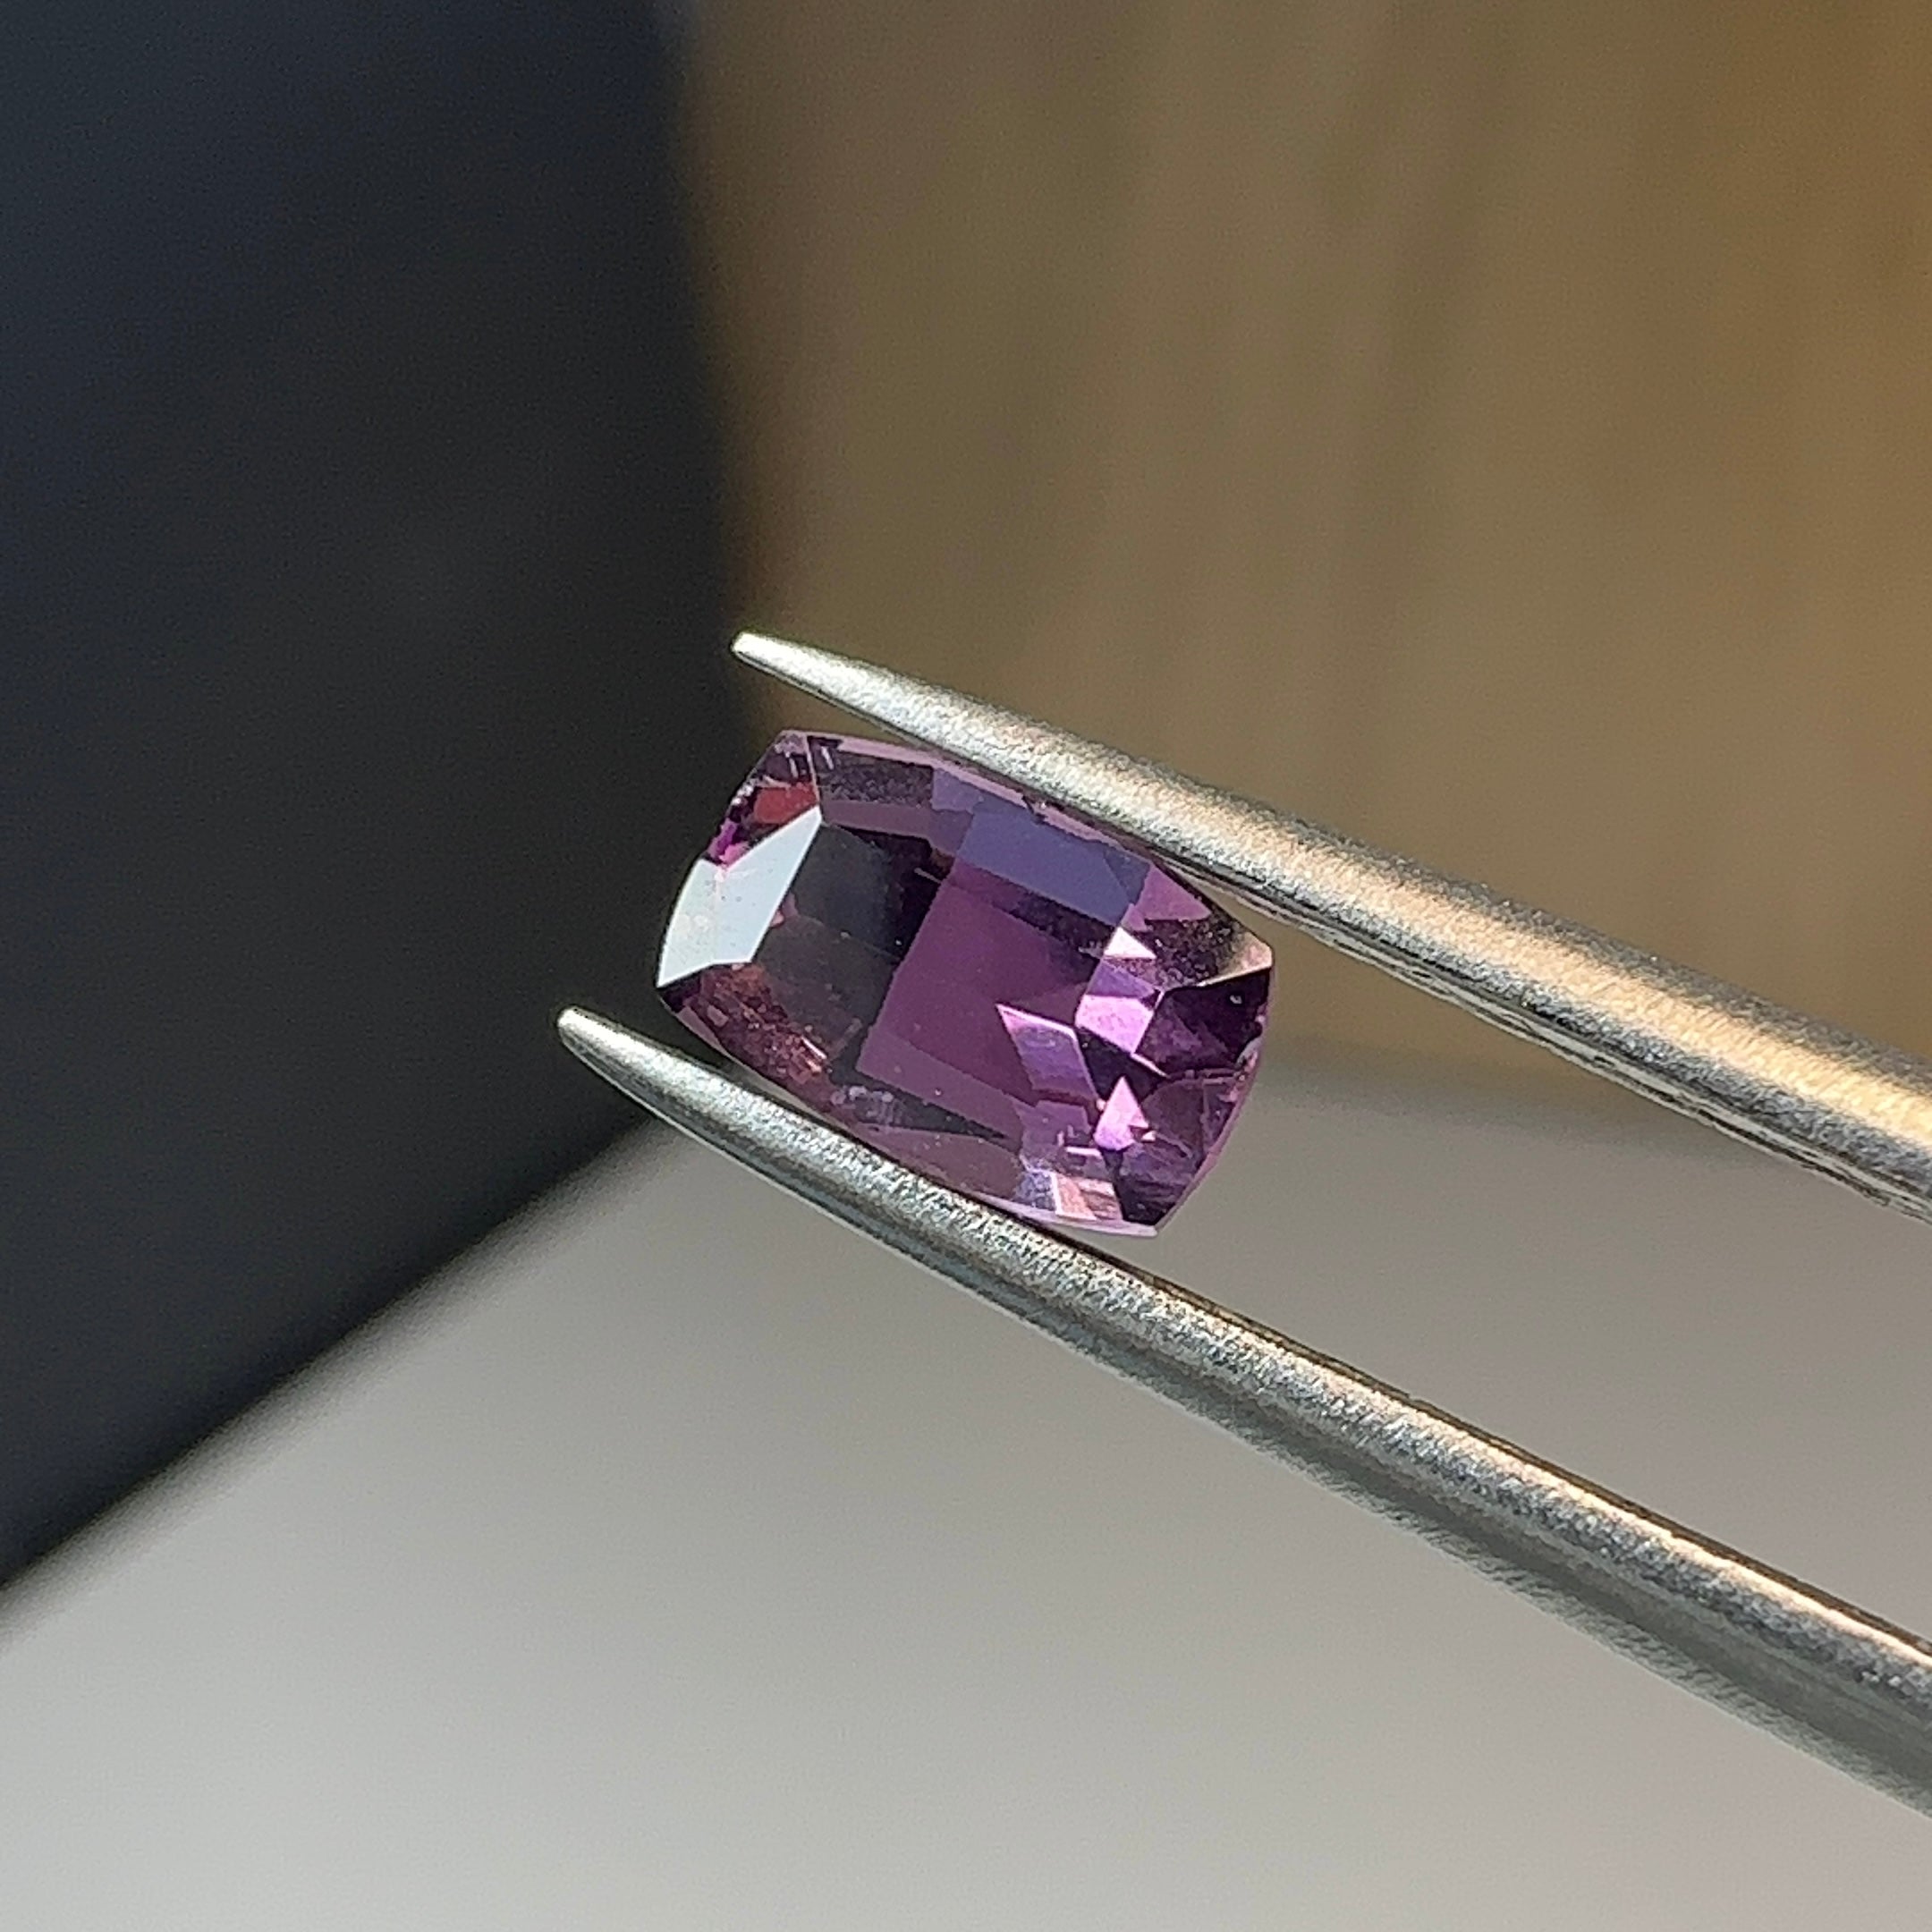 1.22ct Spinel Mahenge, Tanzania. Untreated Unheated, slightly included, see pictures of the back